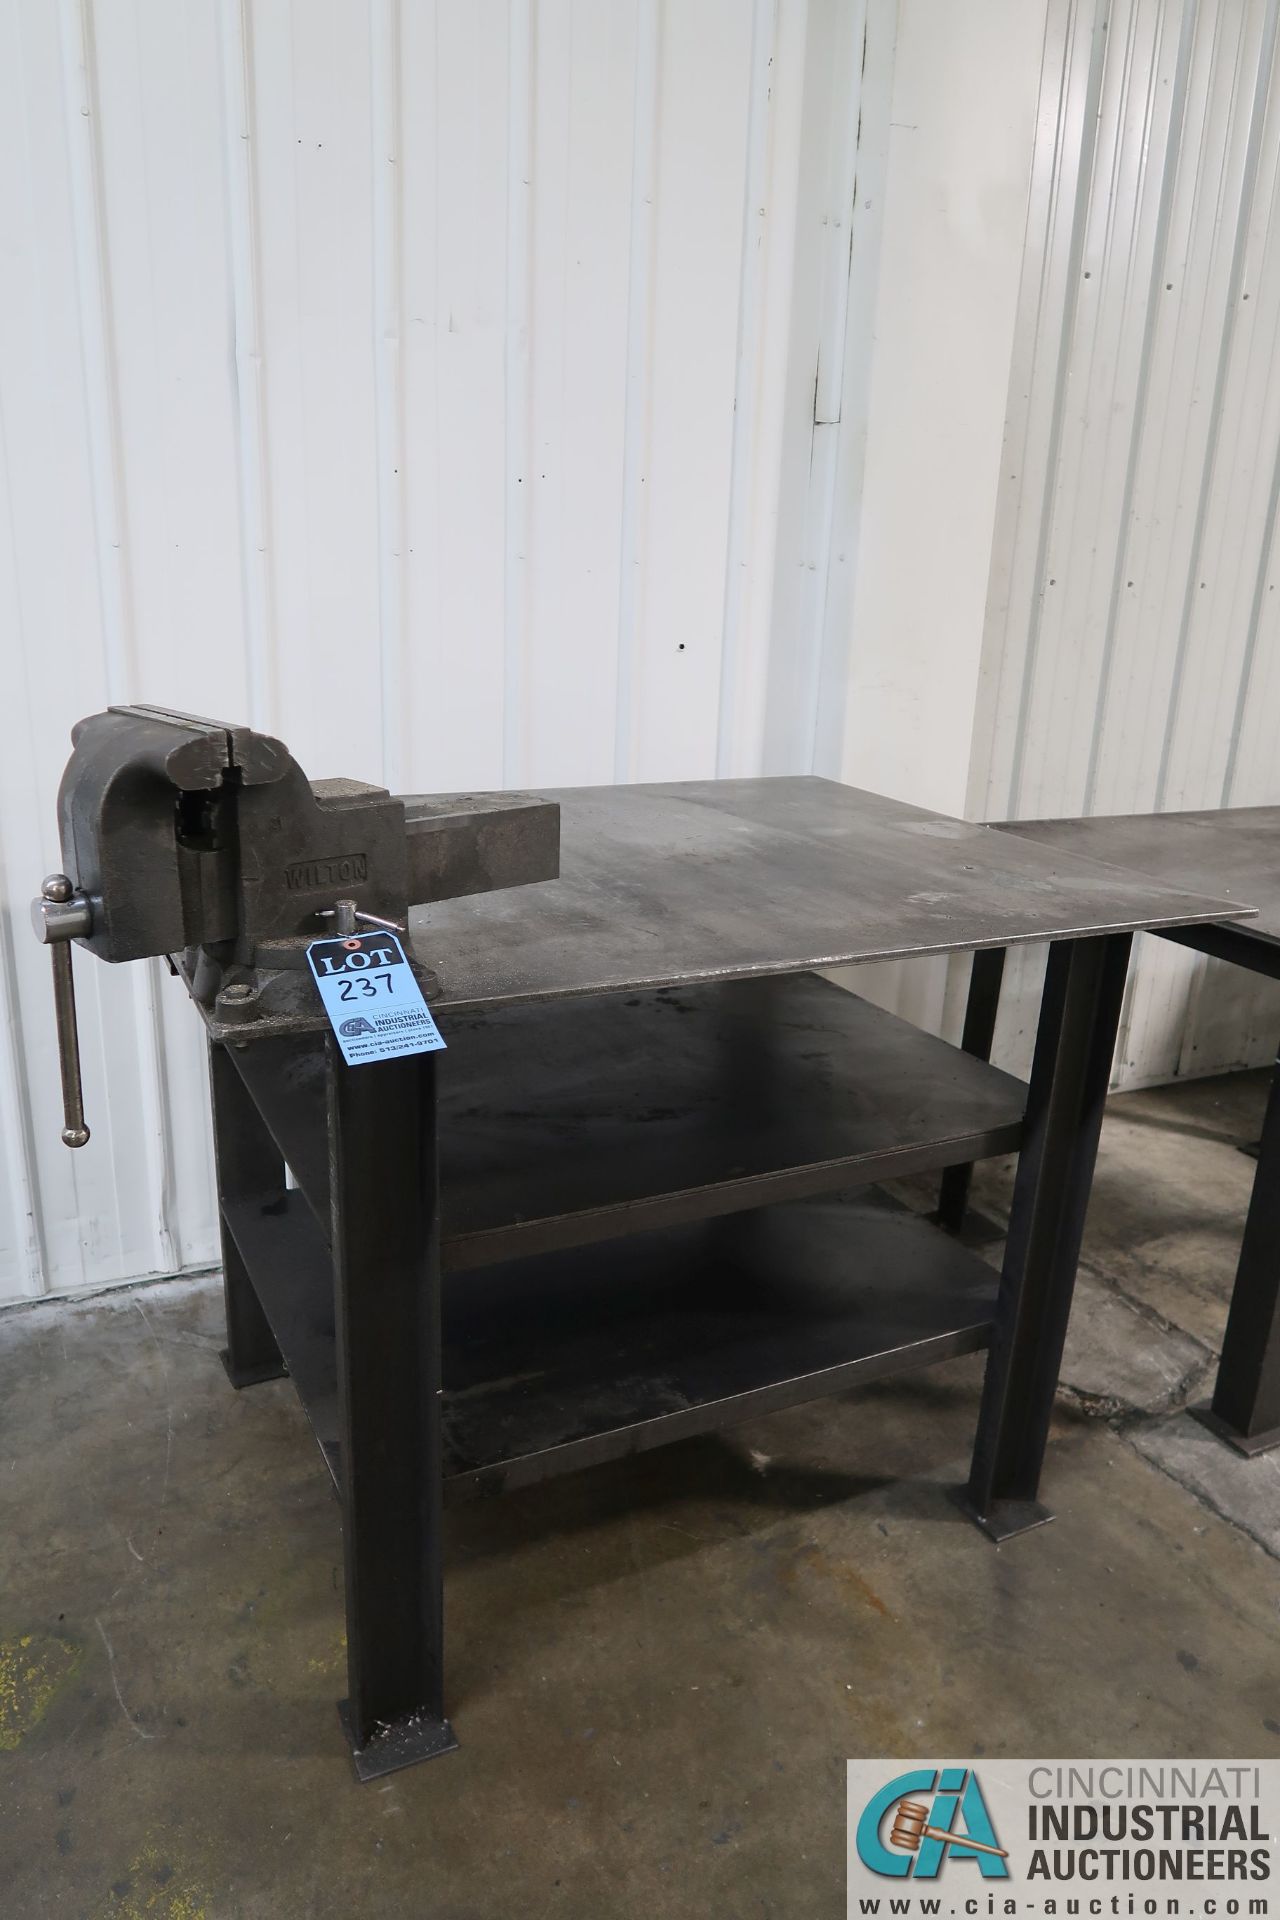 40" X 50" X 37" HIGH X 1/2" THICK HEAVY DUTY SHOP BUILT WELDED STEEL TABLE WITH 8" WILTON MOUNTED